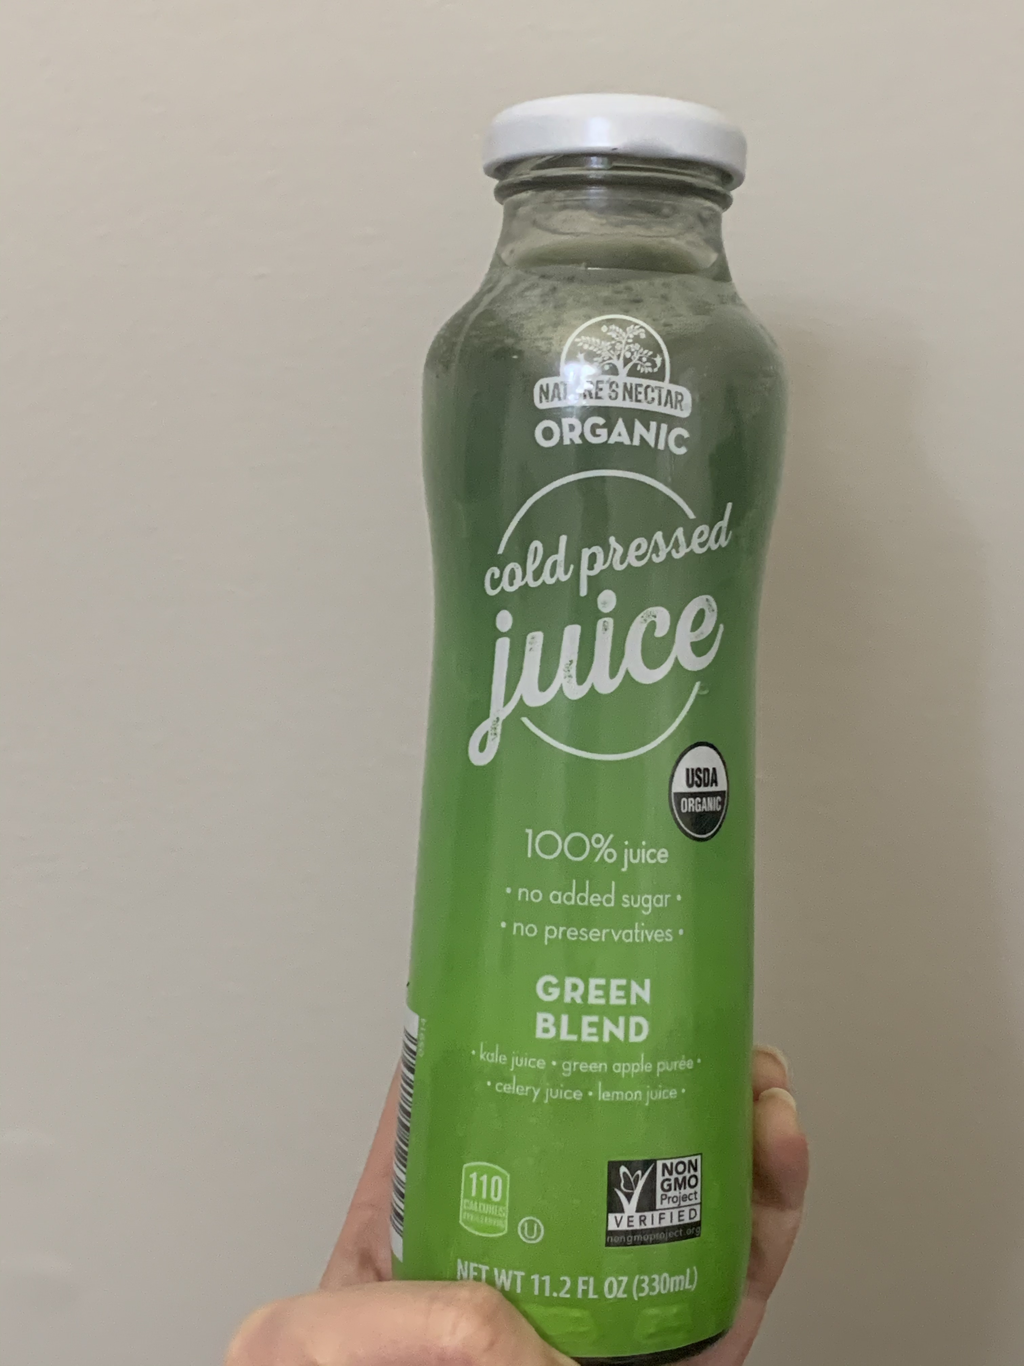 Aldi Nature's Nectar Organic Cold Pressed Juice - Green Blend Review